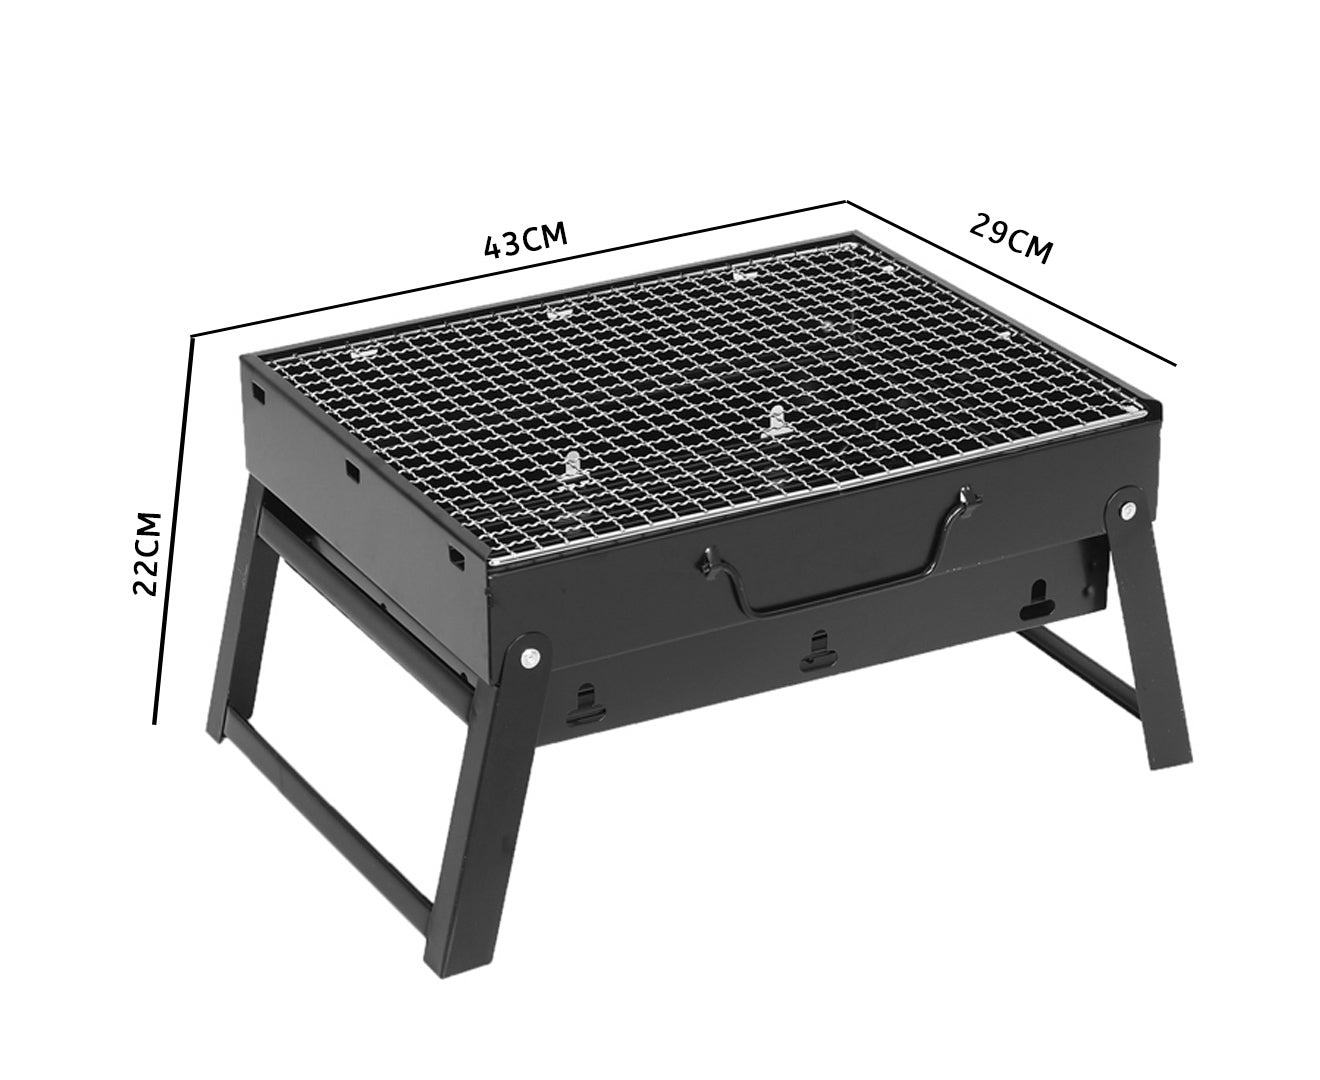 Premium 2X 43cm Portable Folding Thick Box-Type Charcoal Grill for Outdoor BBQ Camping - image2